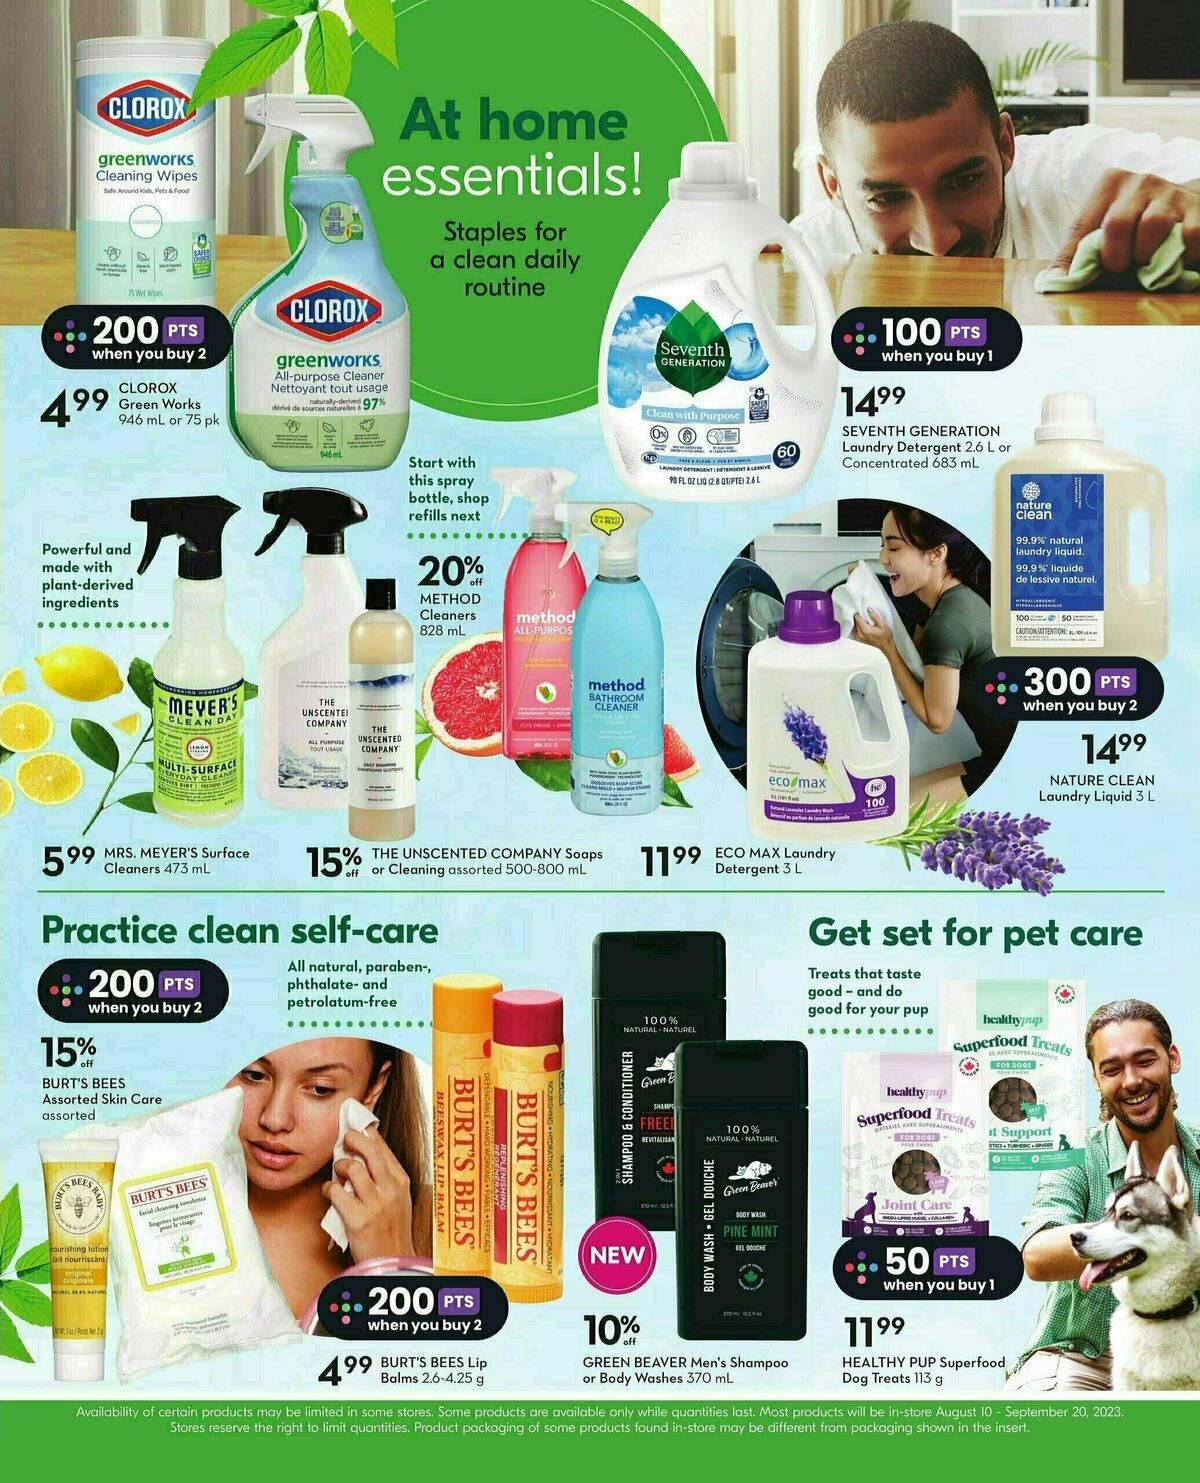 Sobeys Flyer from August 17